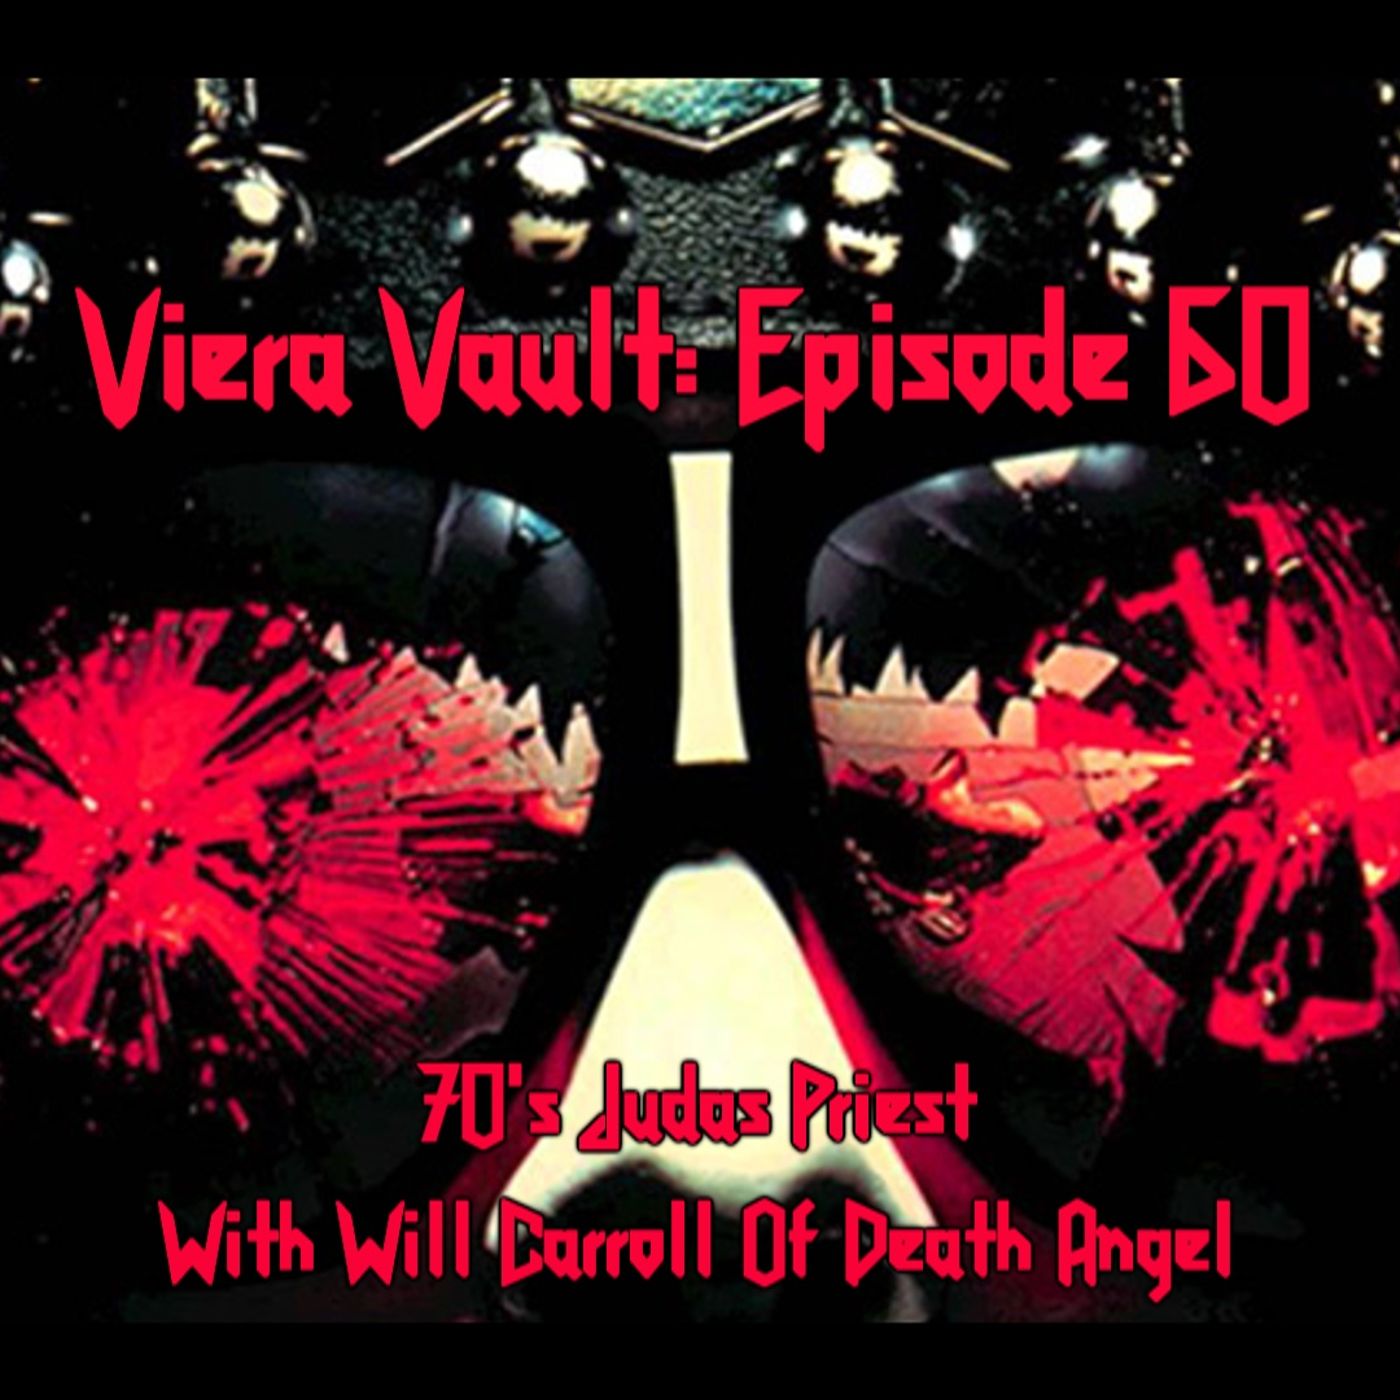 Episode 60: Judas Priest Discography With Will Carroll of Death Angel Part One: The 70's